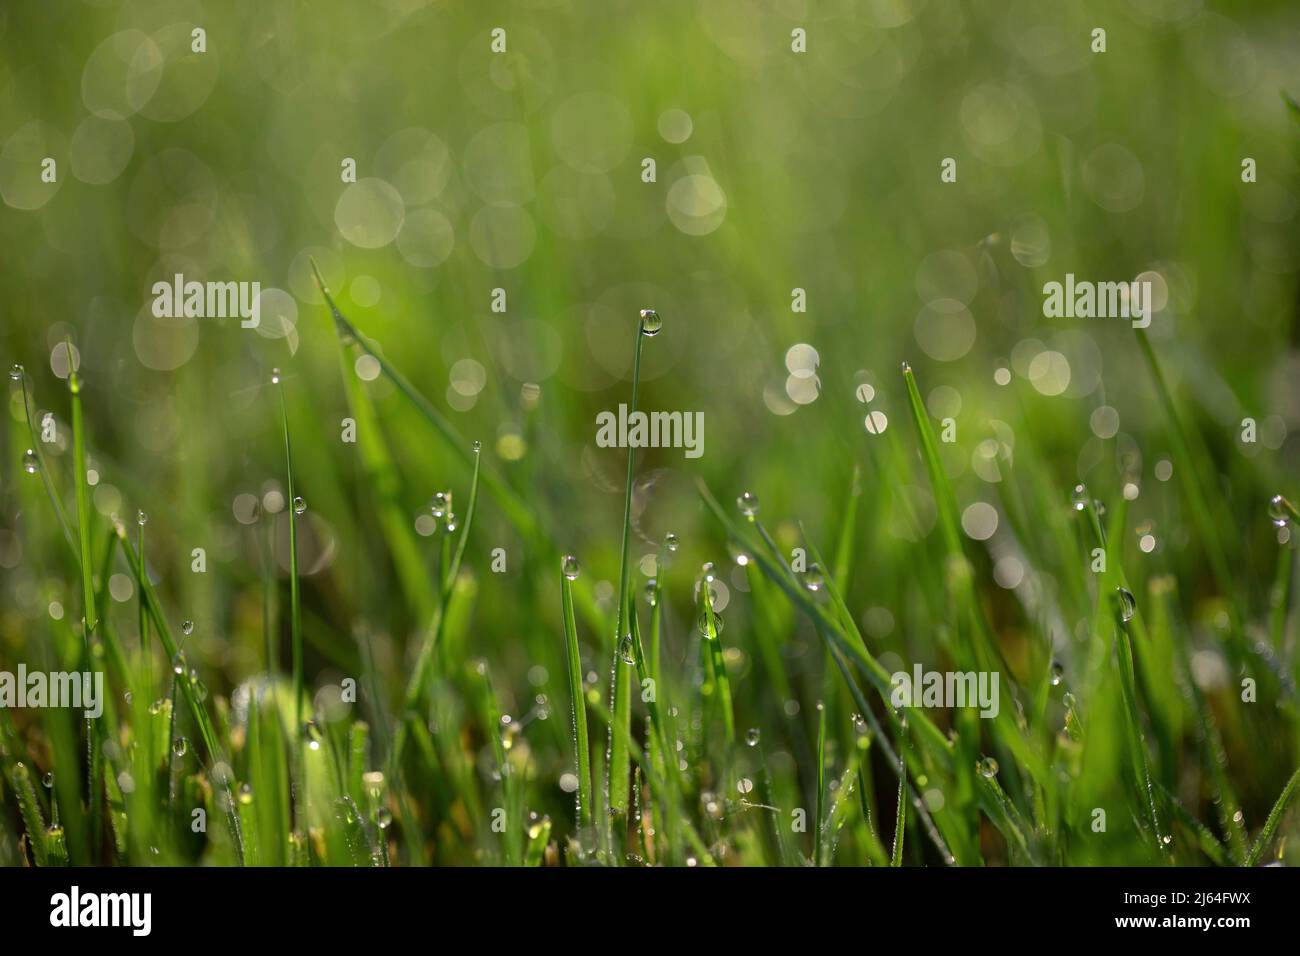 Morning dew drops on the grass. Stock Photo